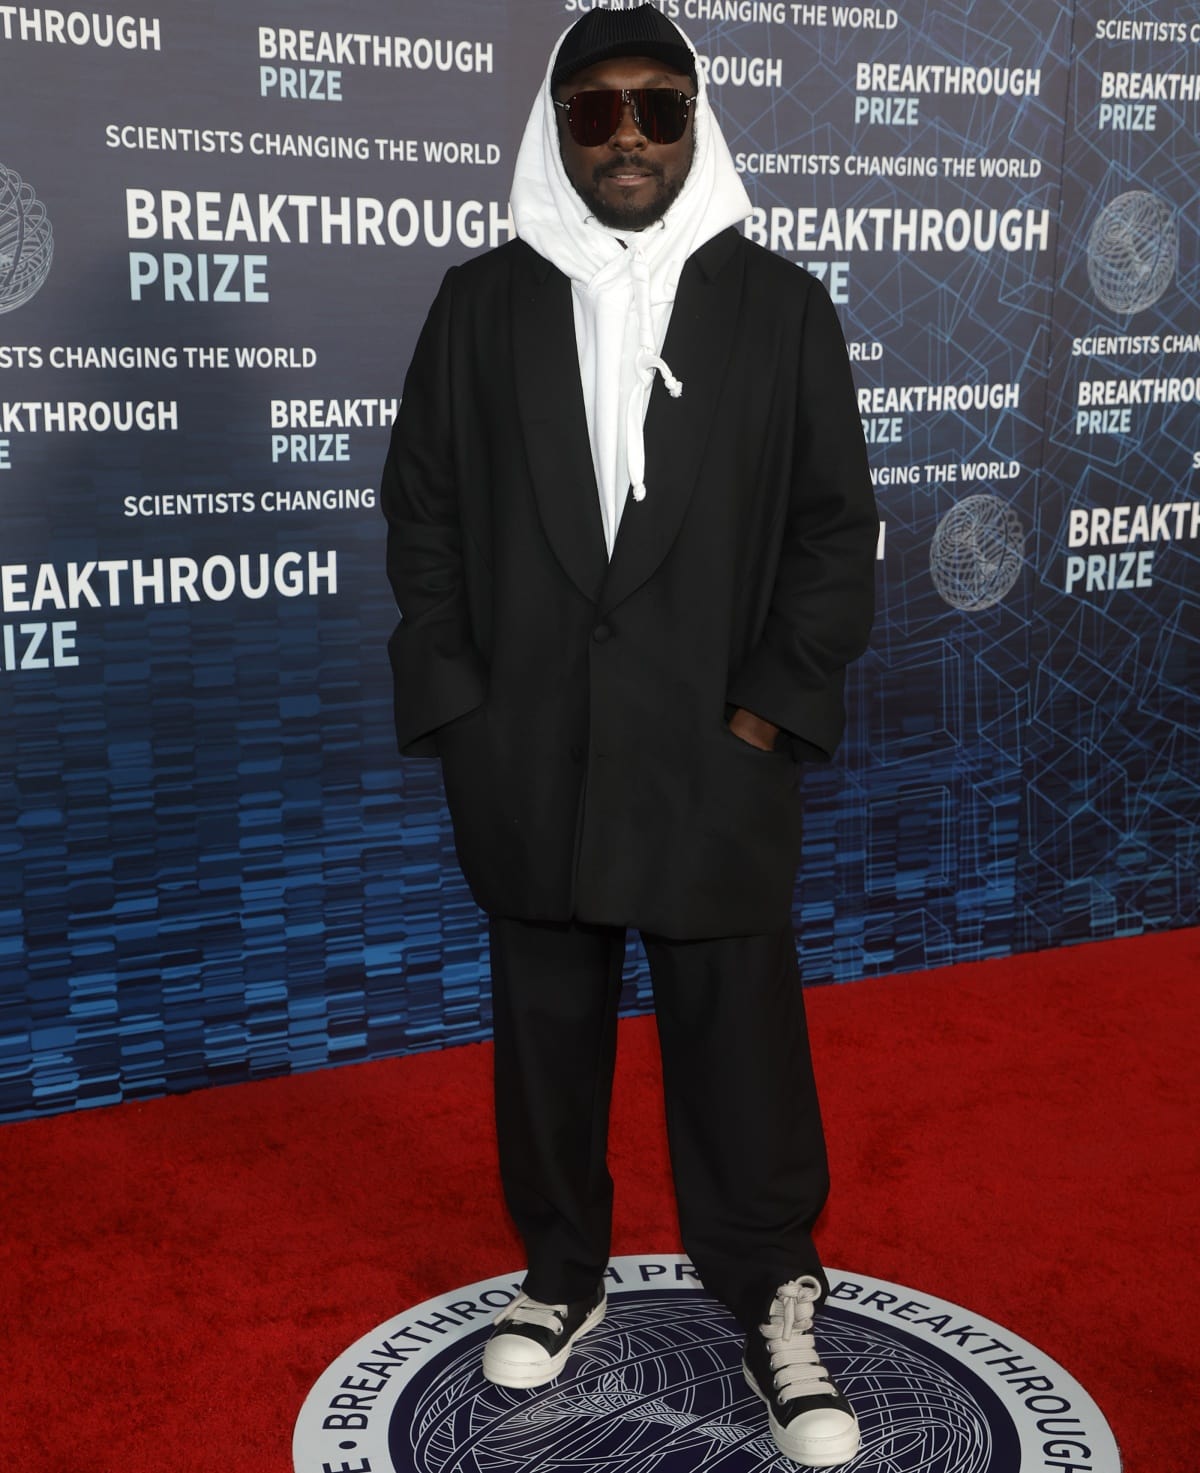 will.i.am was one of the performers during the 9th Annual Breakthrough Prize Ceremony